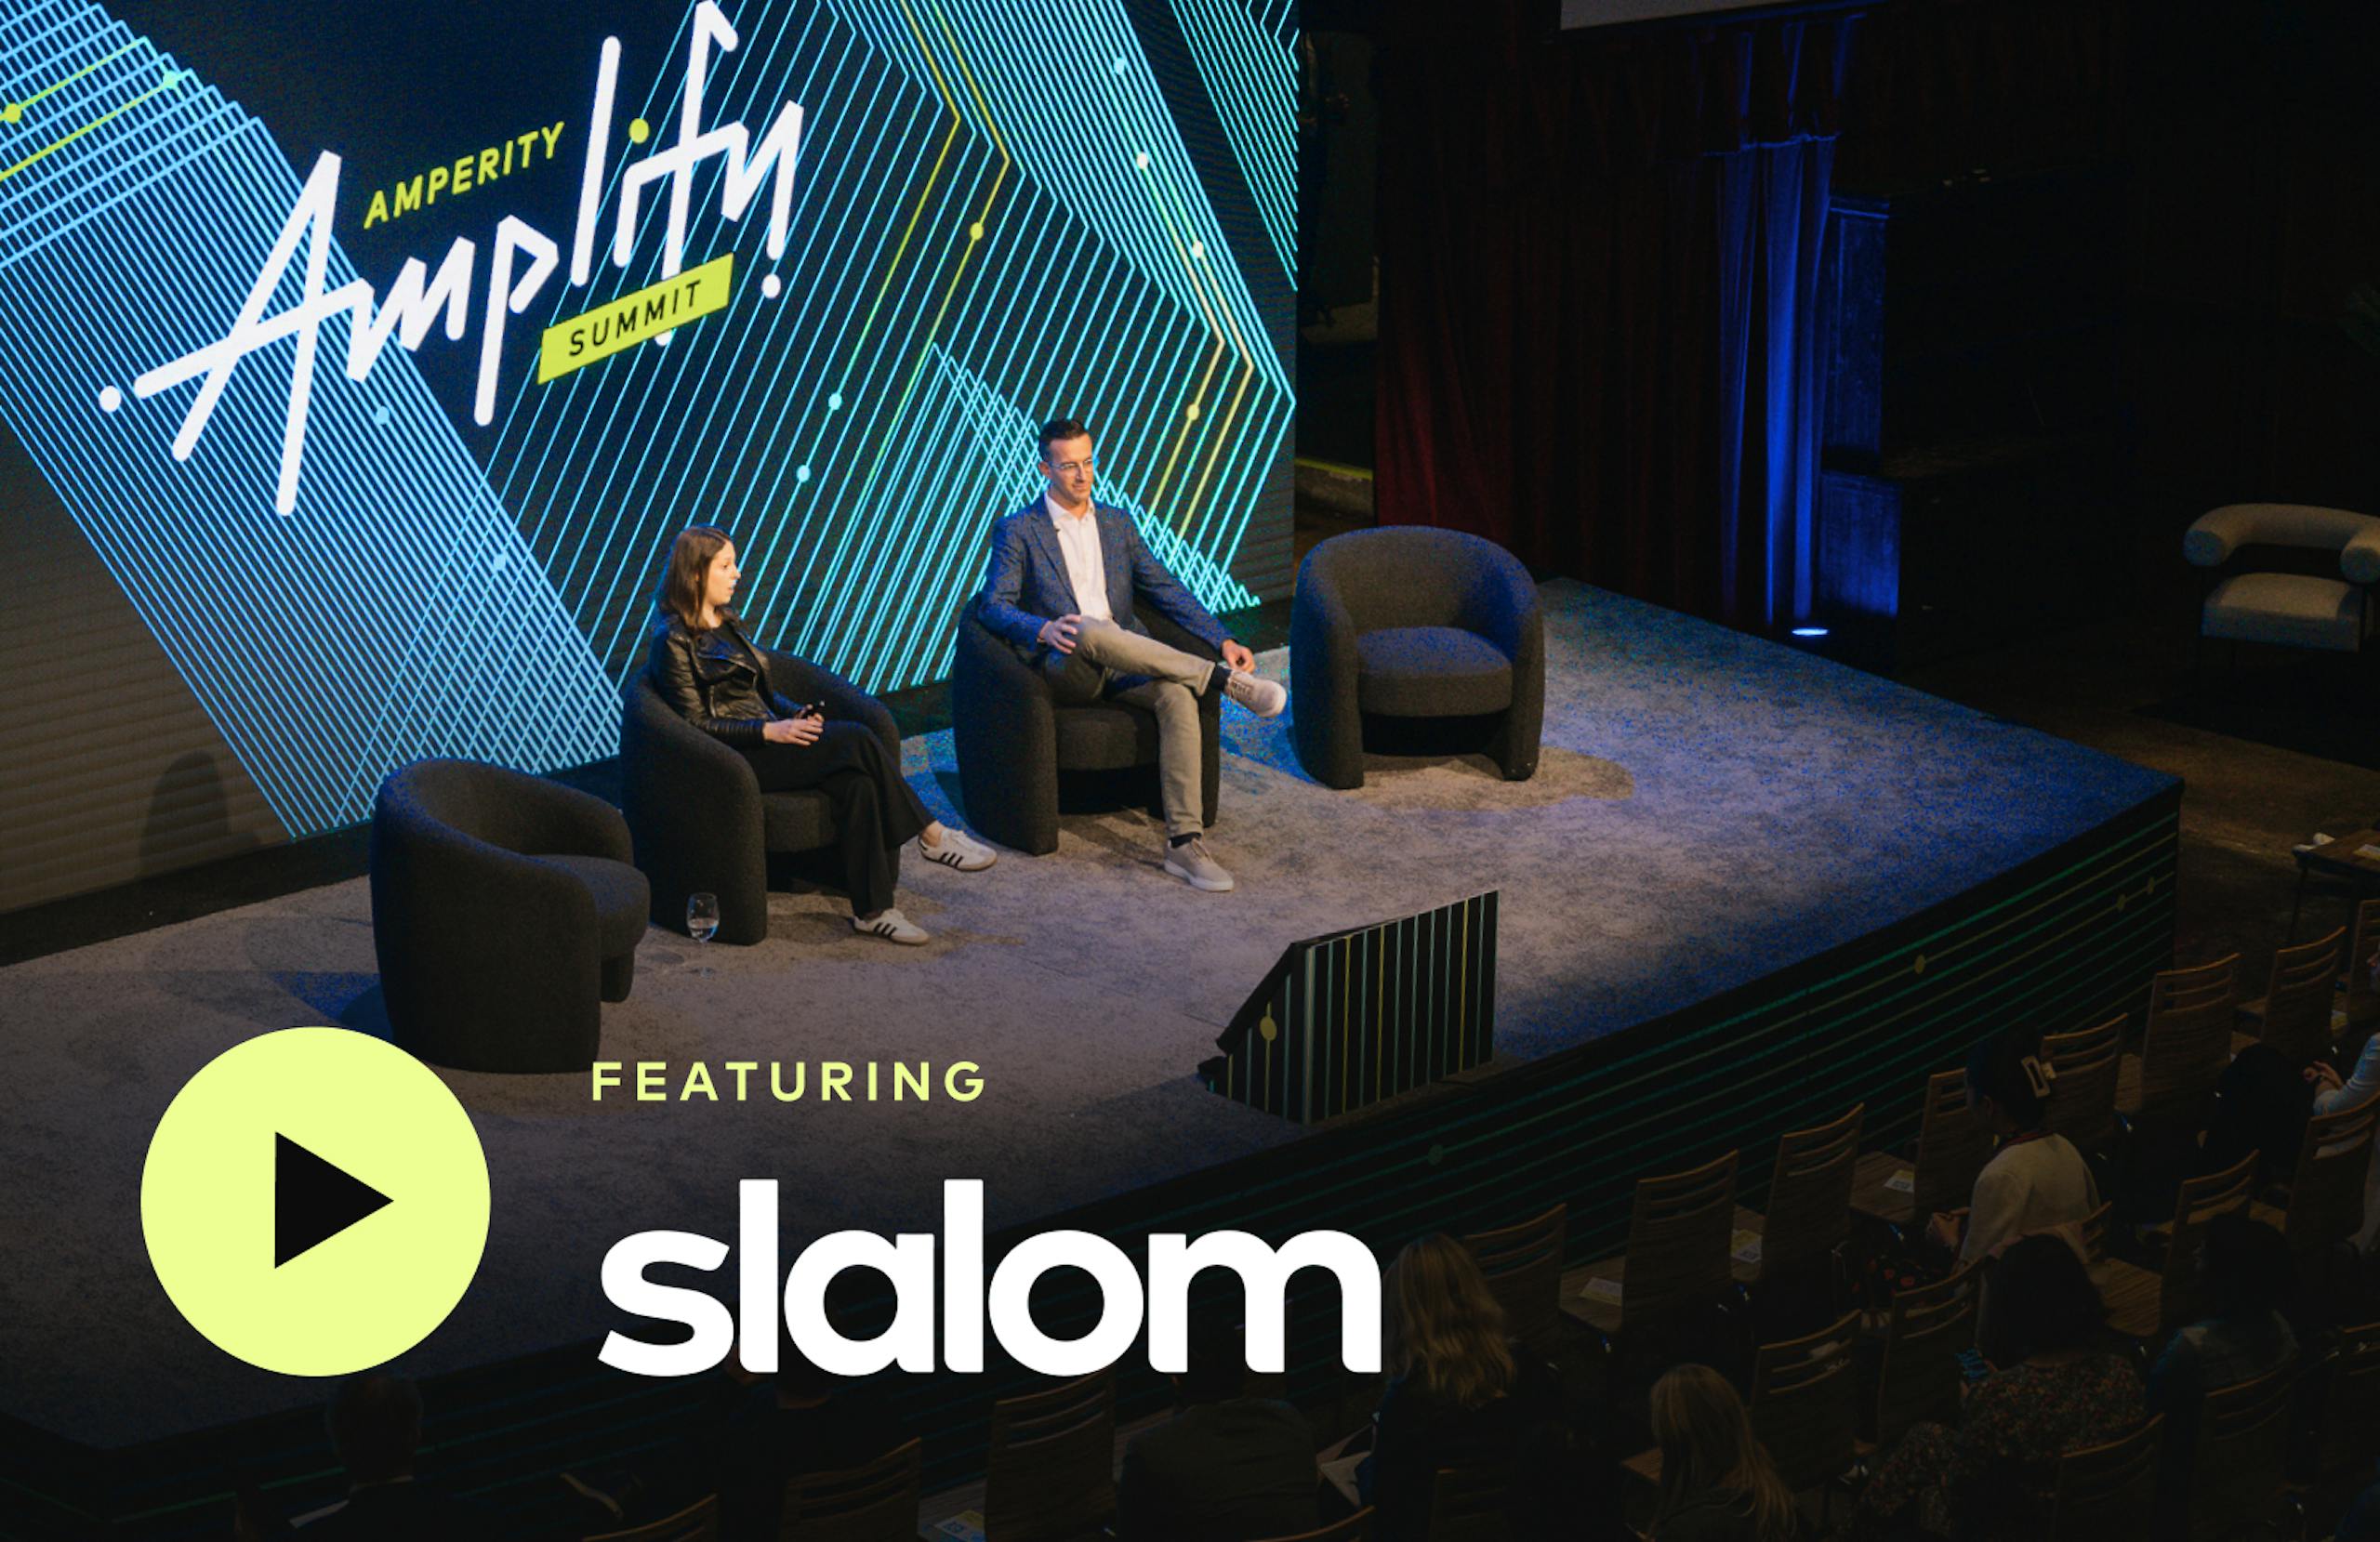 Joyce of Amperity and Logan of Slalom sitting onstage at Amplify Summit.